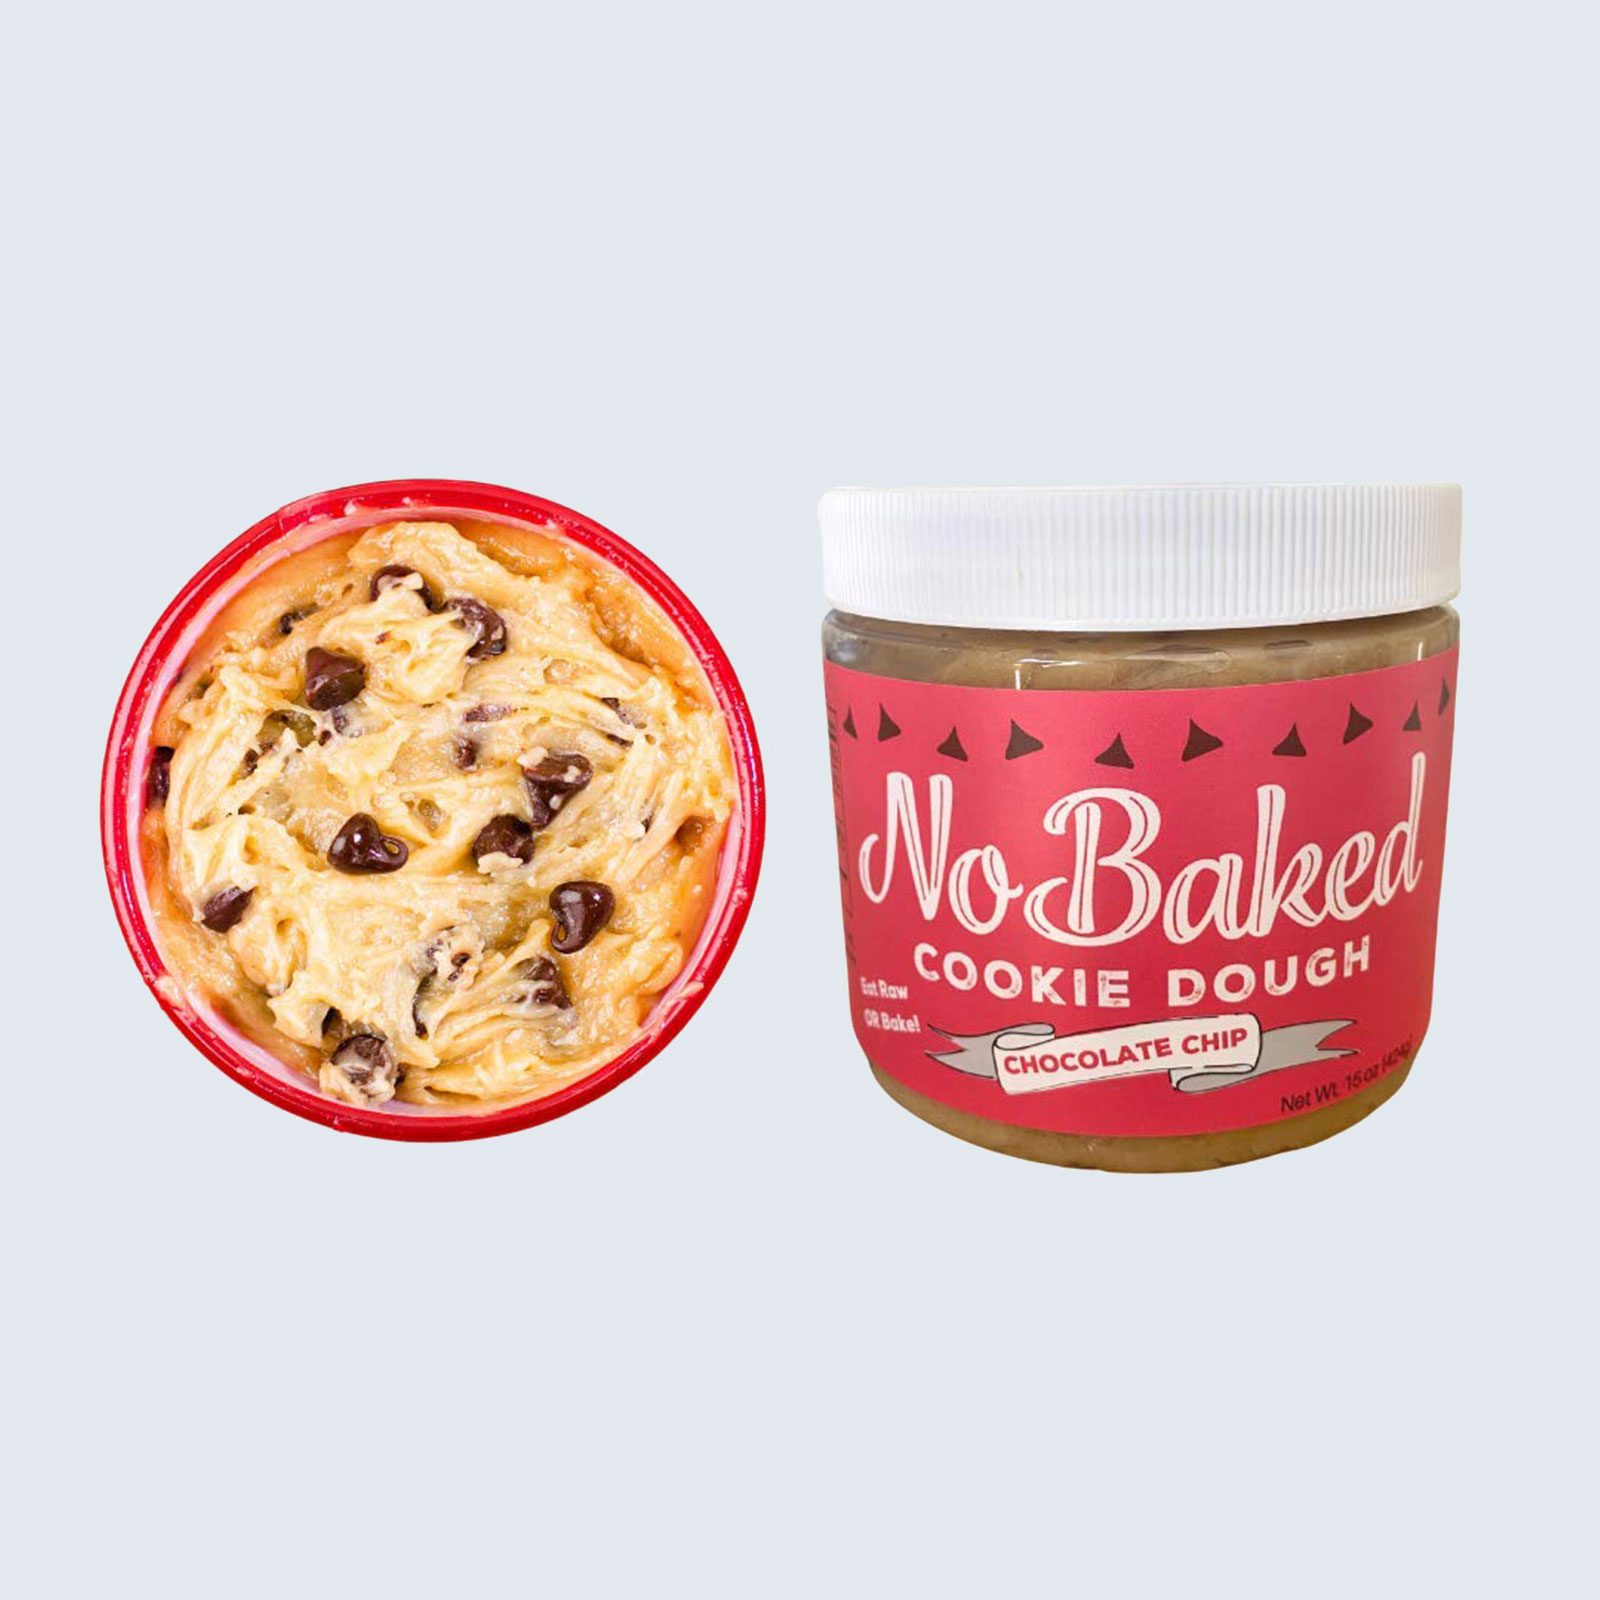 For the midnight muncher: NoBaked Edible Bakeable Cookie Dough